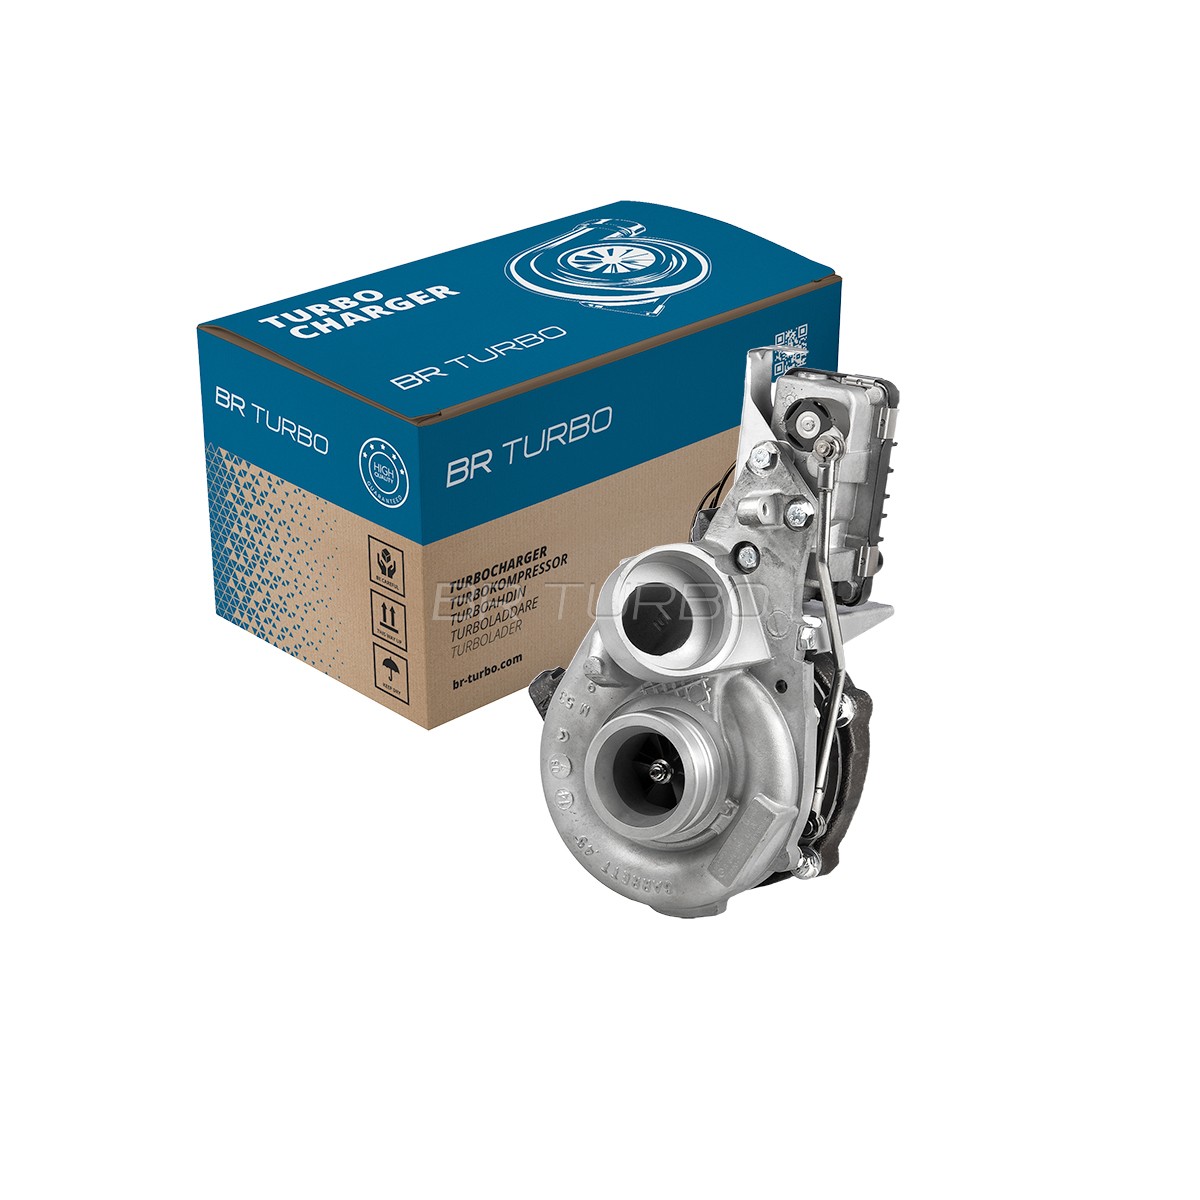 Mercedes E-Class Turbocharger 16875794 BR Turbo 752990-5001RS online buy